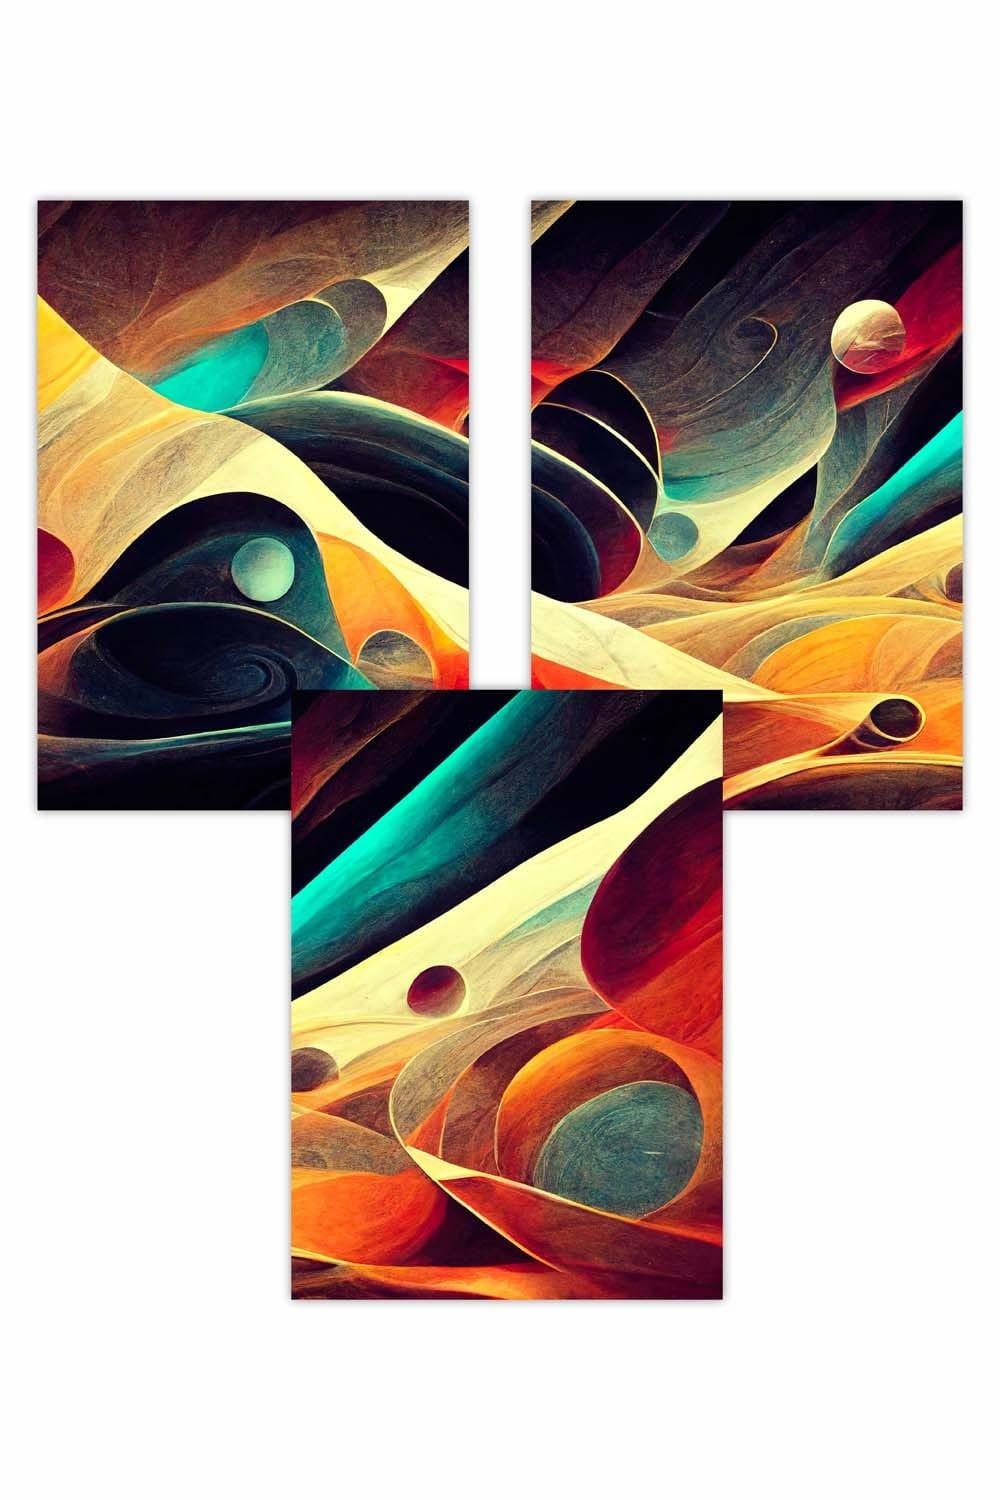 Set of 3 Geometric Abstract Bright Orange Blue and Yellow Mars Art Posters